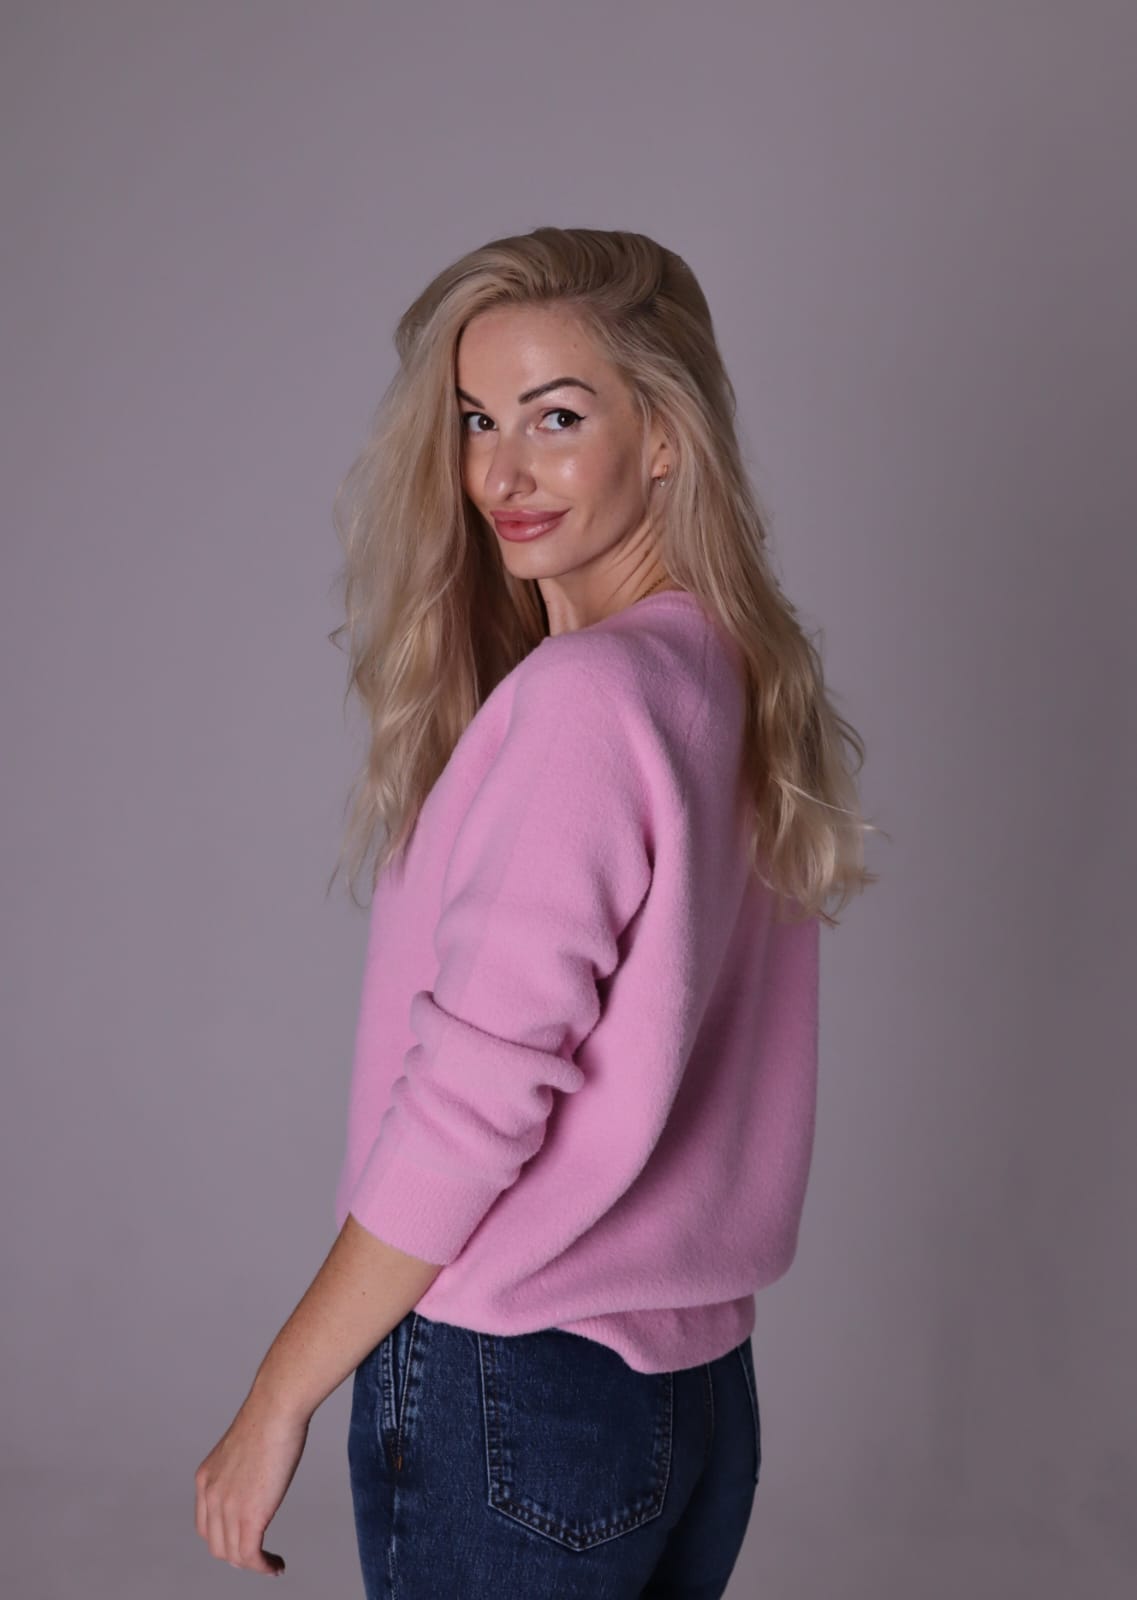 Frau in rosa Pullover und Jeans.